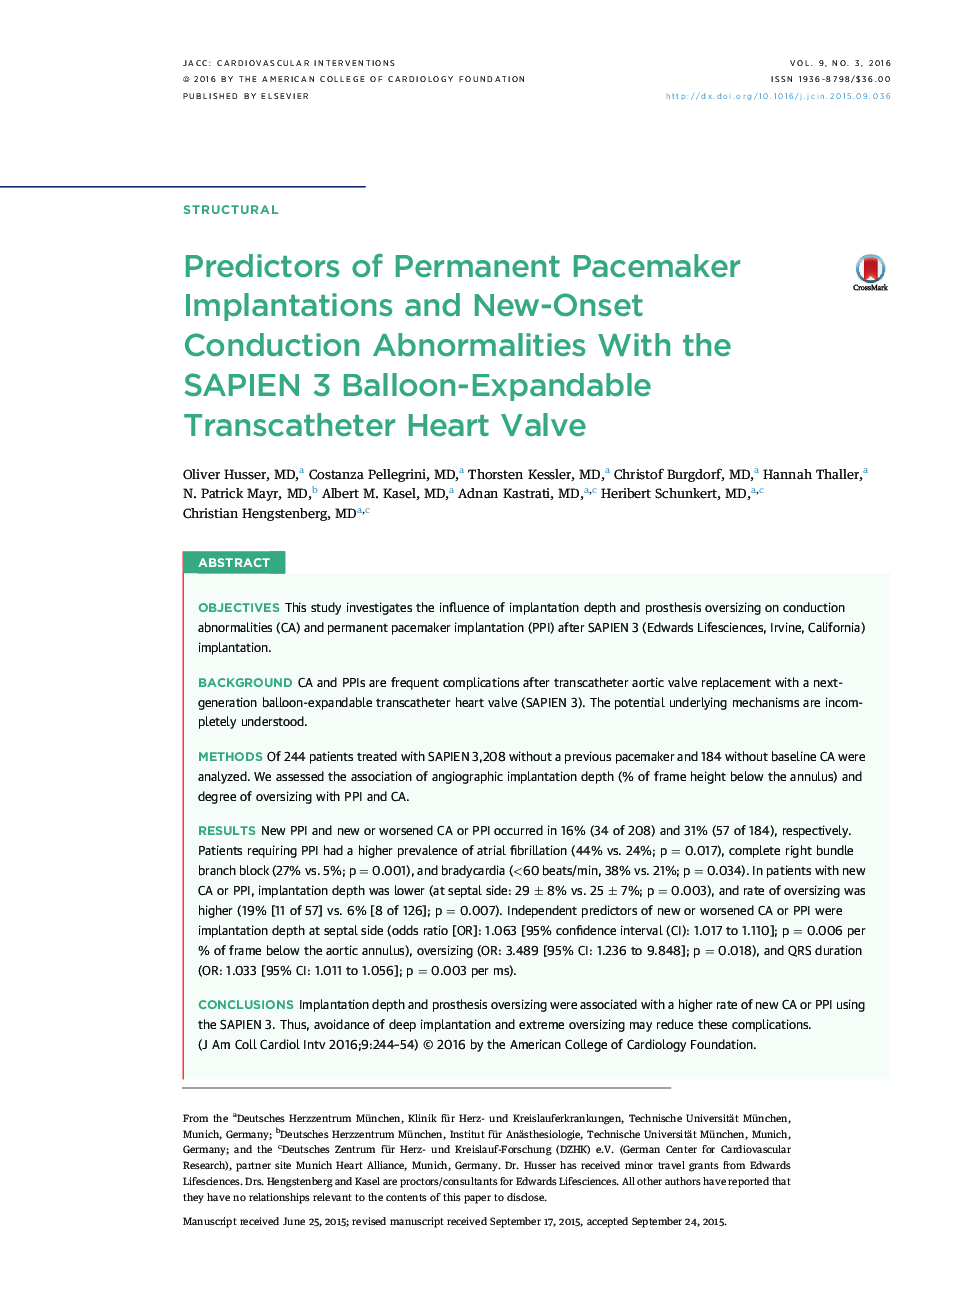 Predictors of Permanent Pacemaker Implantations and New-Onset Conduction Abnormalities With the SAPIEN 3 Balloon-Expandable Transcatheter Heart Valve